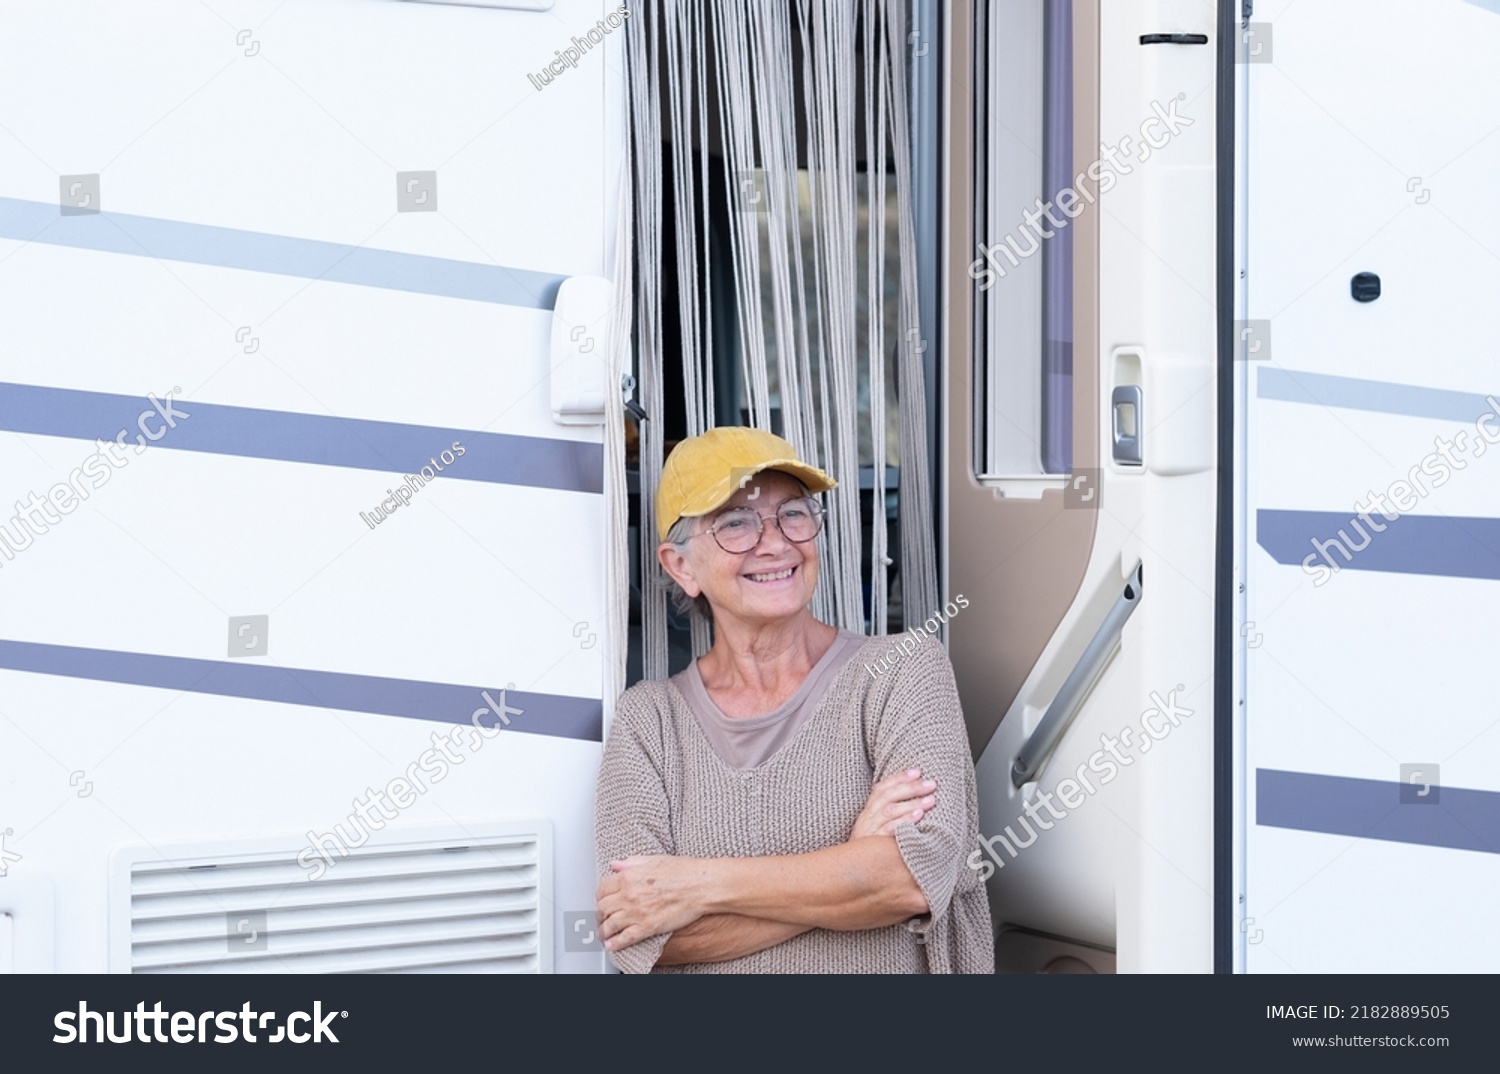 266 70s camper Stock Photos, Images & Photography | Shutterstock